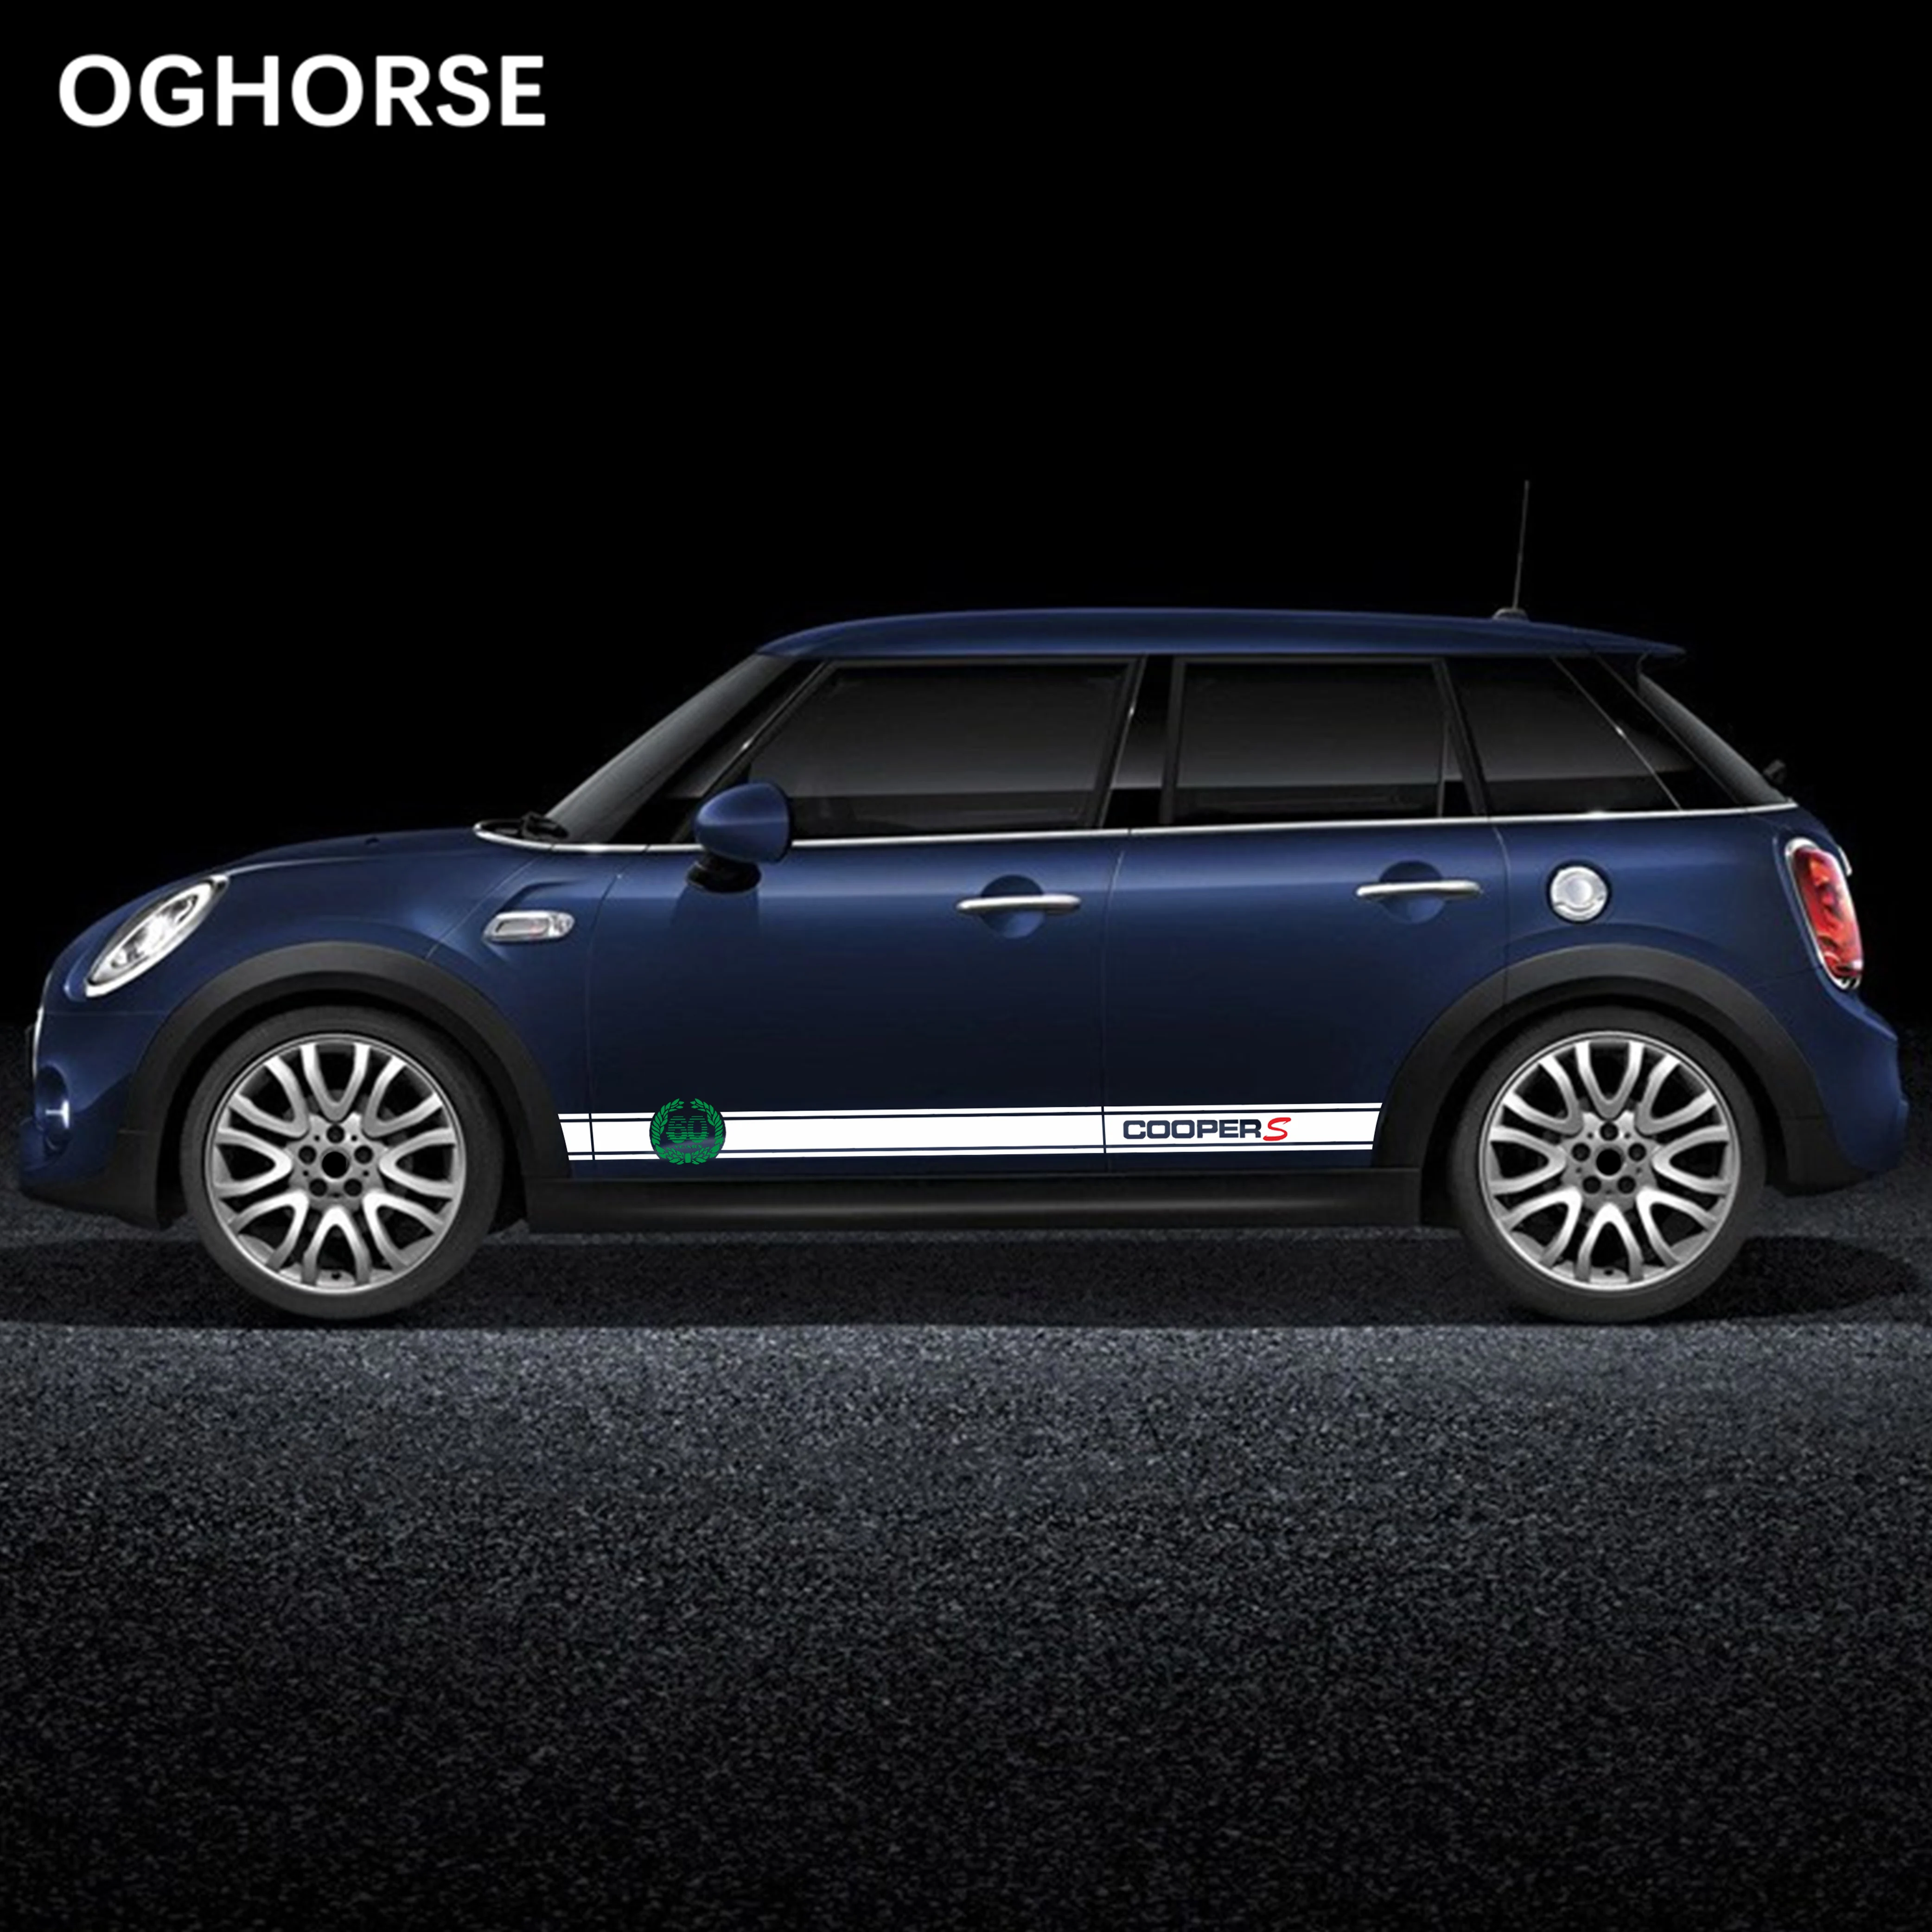 60th Anniversary Styling Car Door Side Stripes Skirt Sticker Decal For MINI Cooper S F54 F55 F56 F57 F60 Countryman Accessories